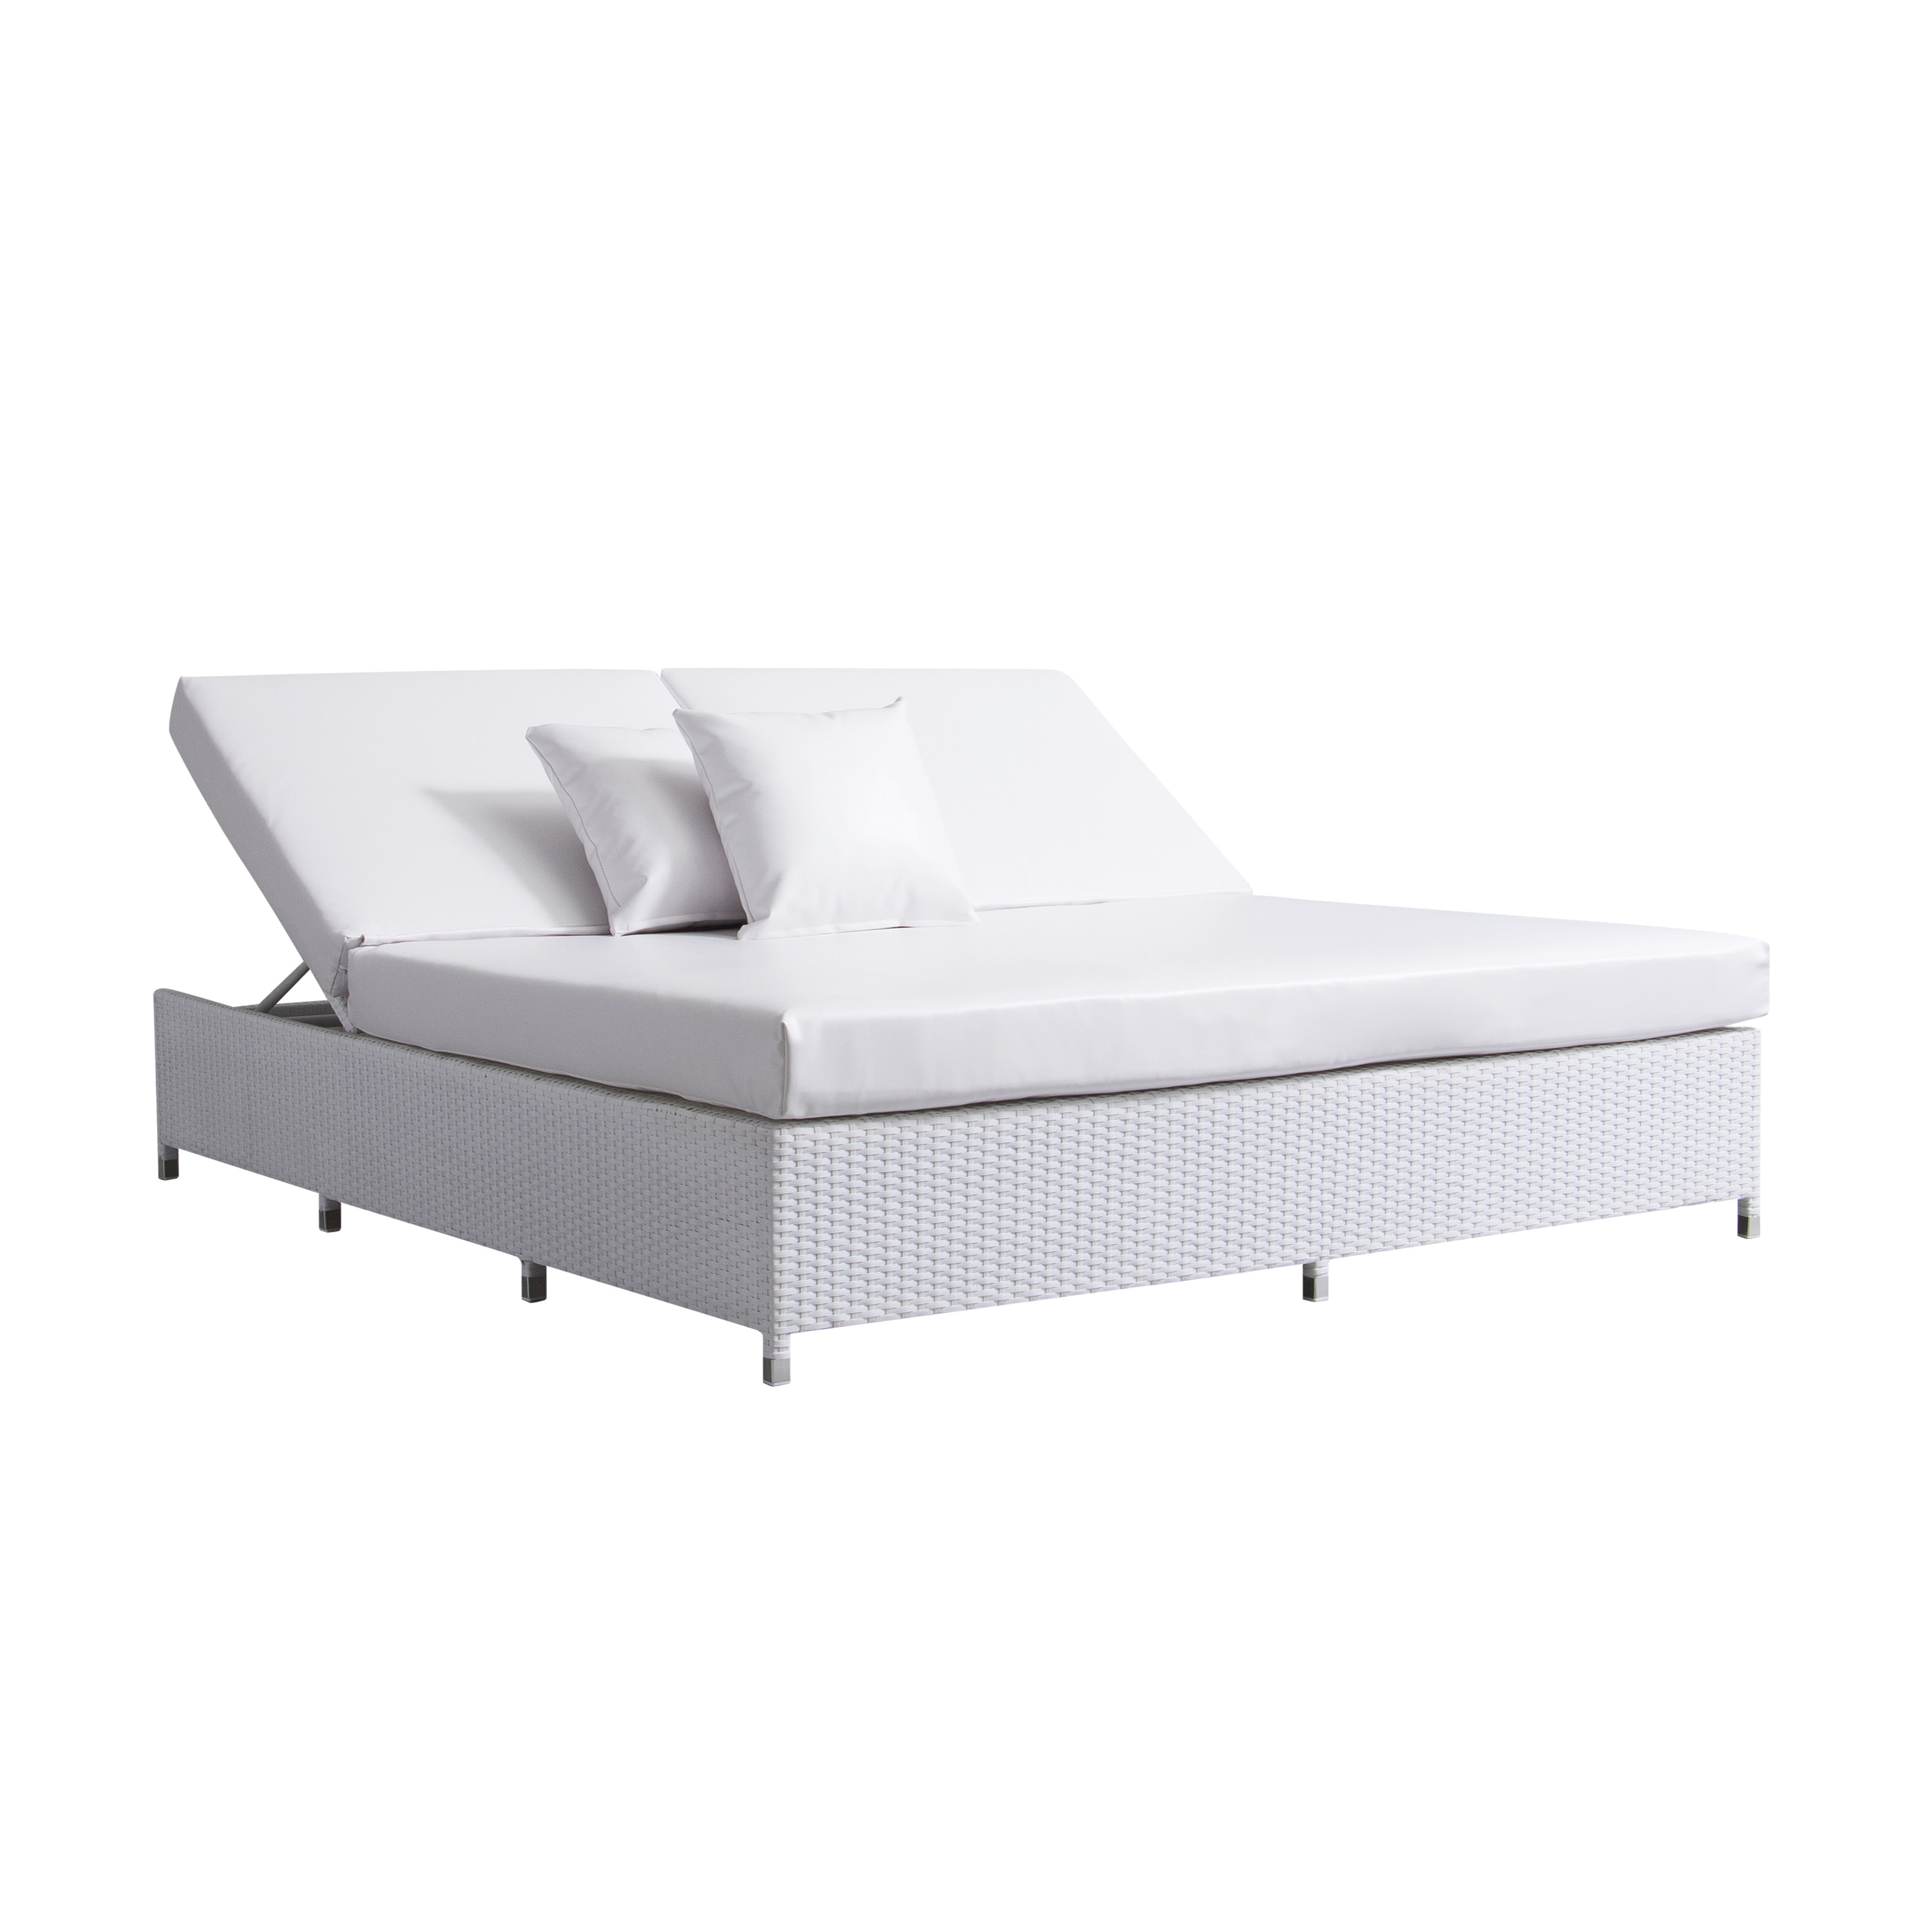 Angela rattan daybed S4